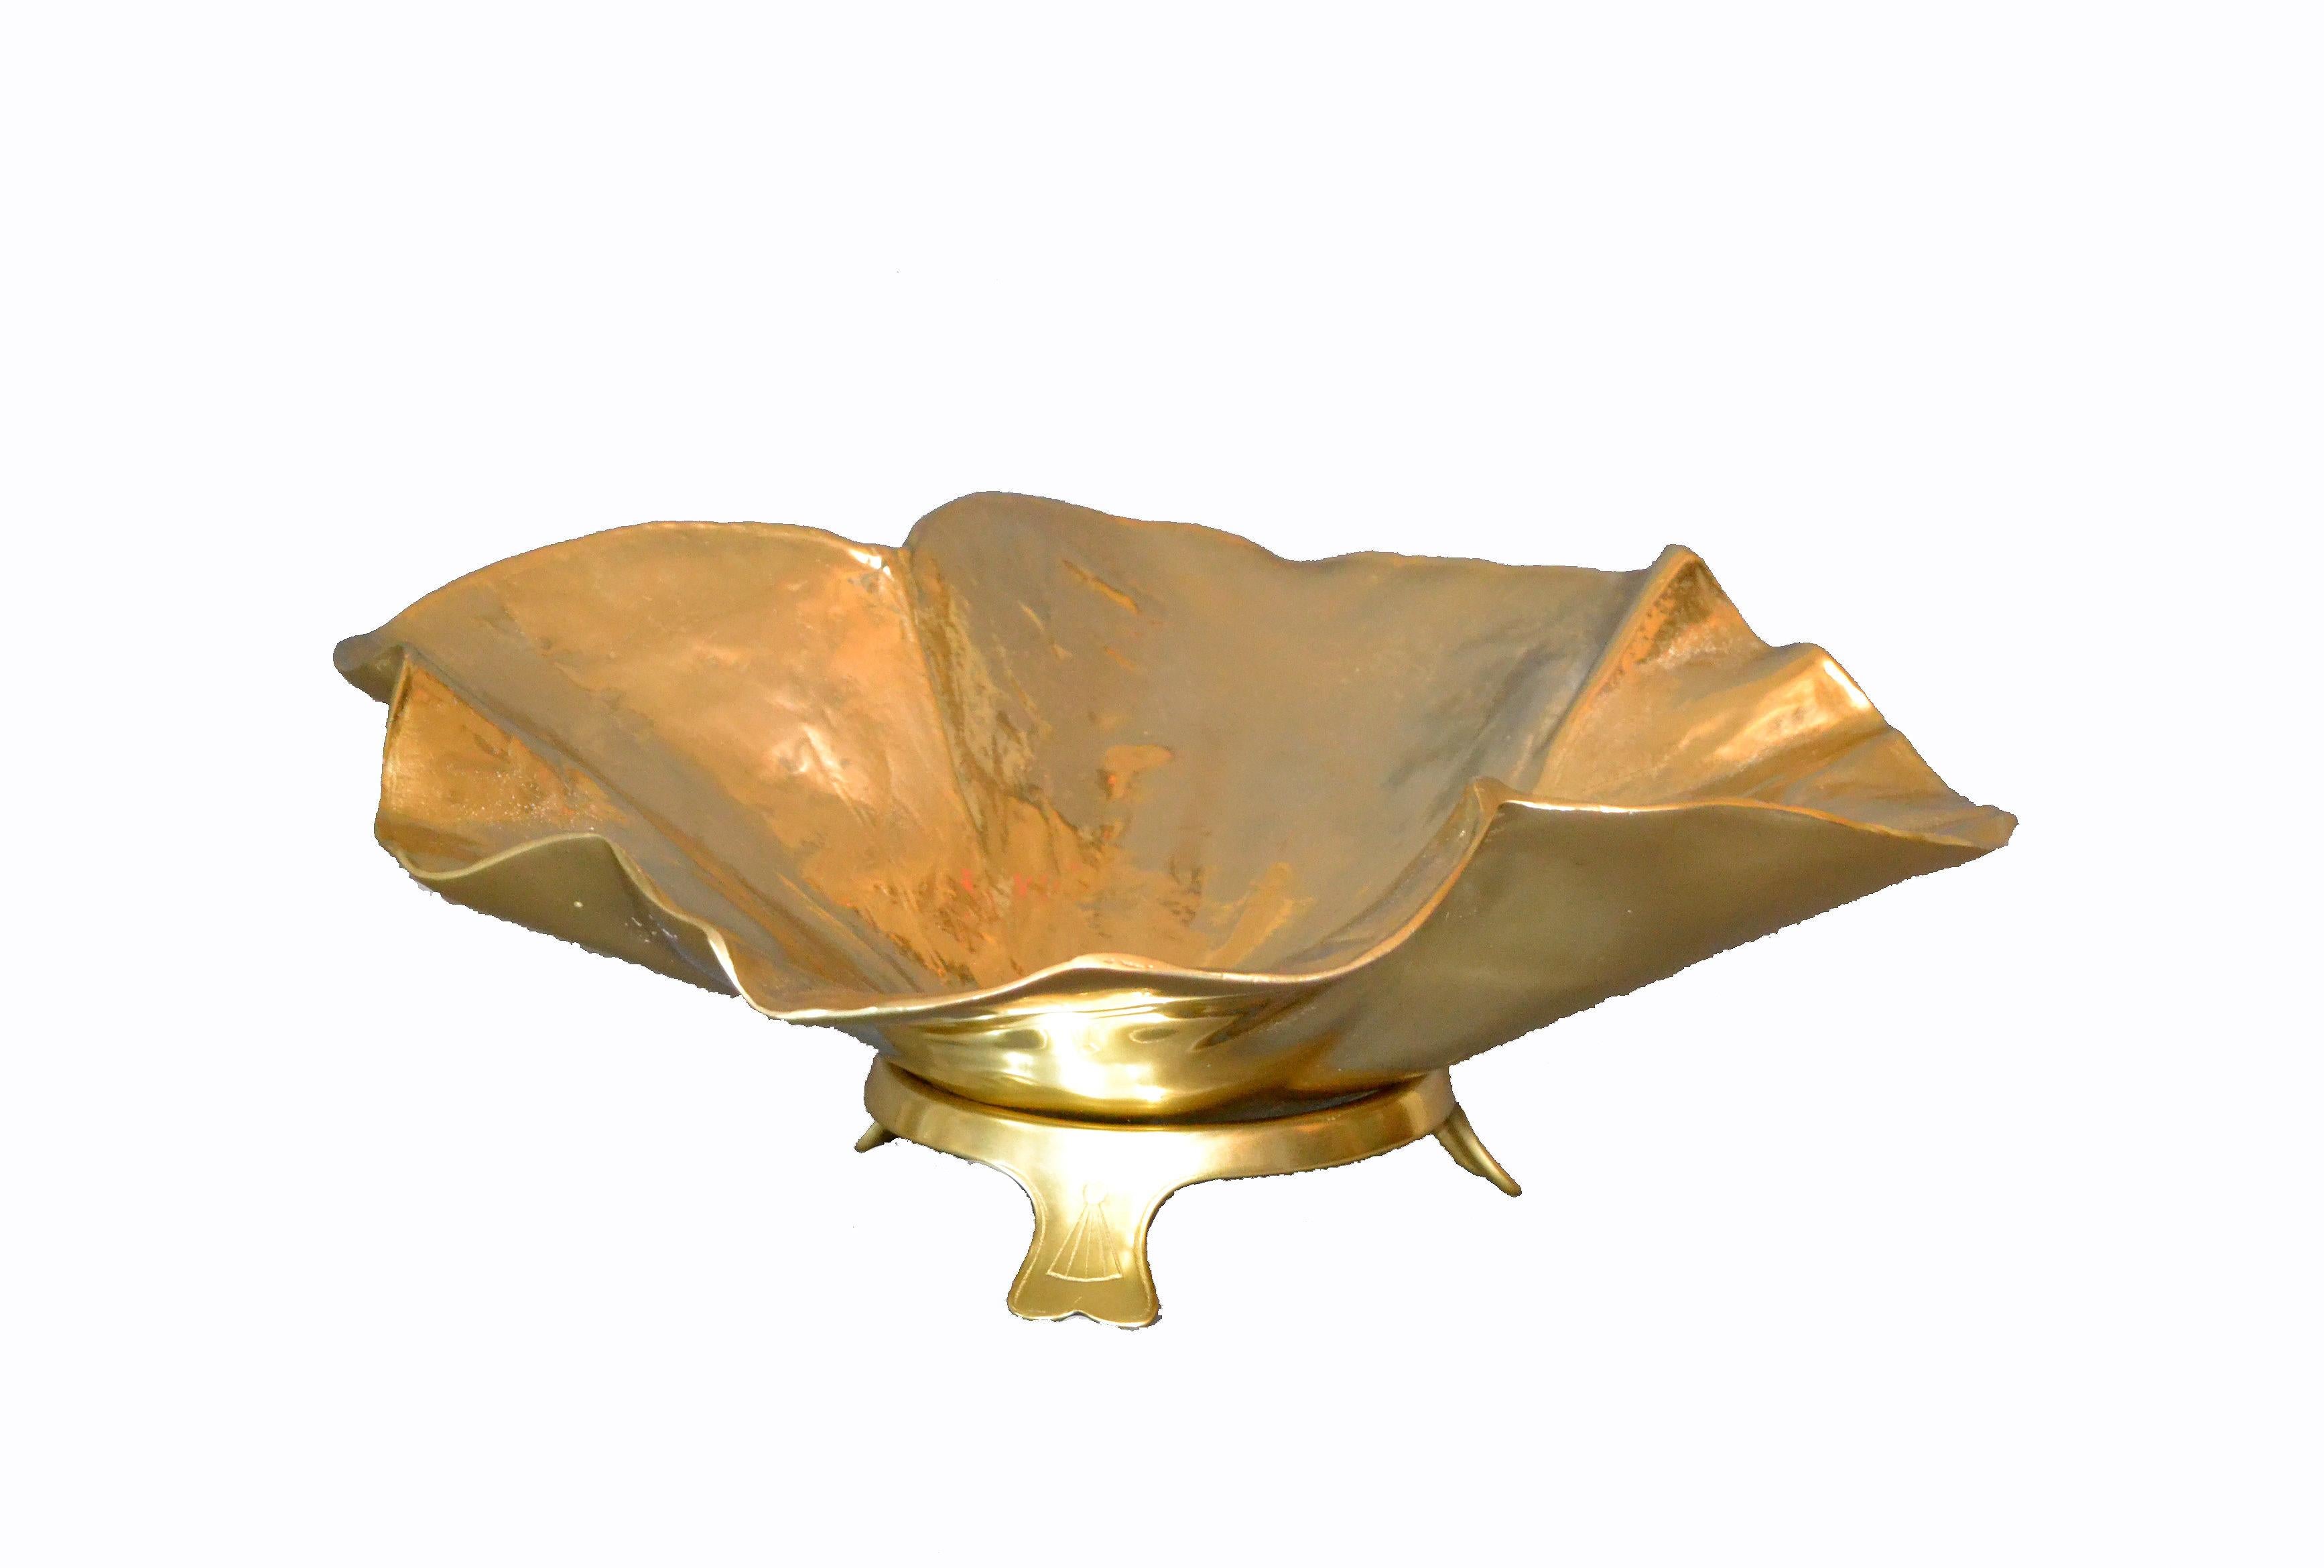 Large handcrafted brass lotus leaf bowl with tri-pot stand by Oskar J.W. Hansen.
Stunning detail with lotus leaf veins and texture. Raised ruffled edge, rounded bottom, fits into its original tri-foot stand .
Makers mark embossed underneath: